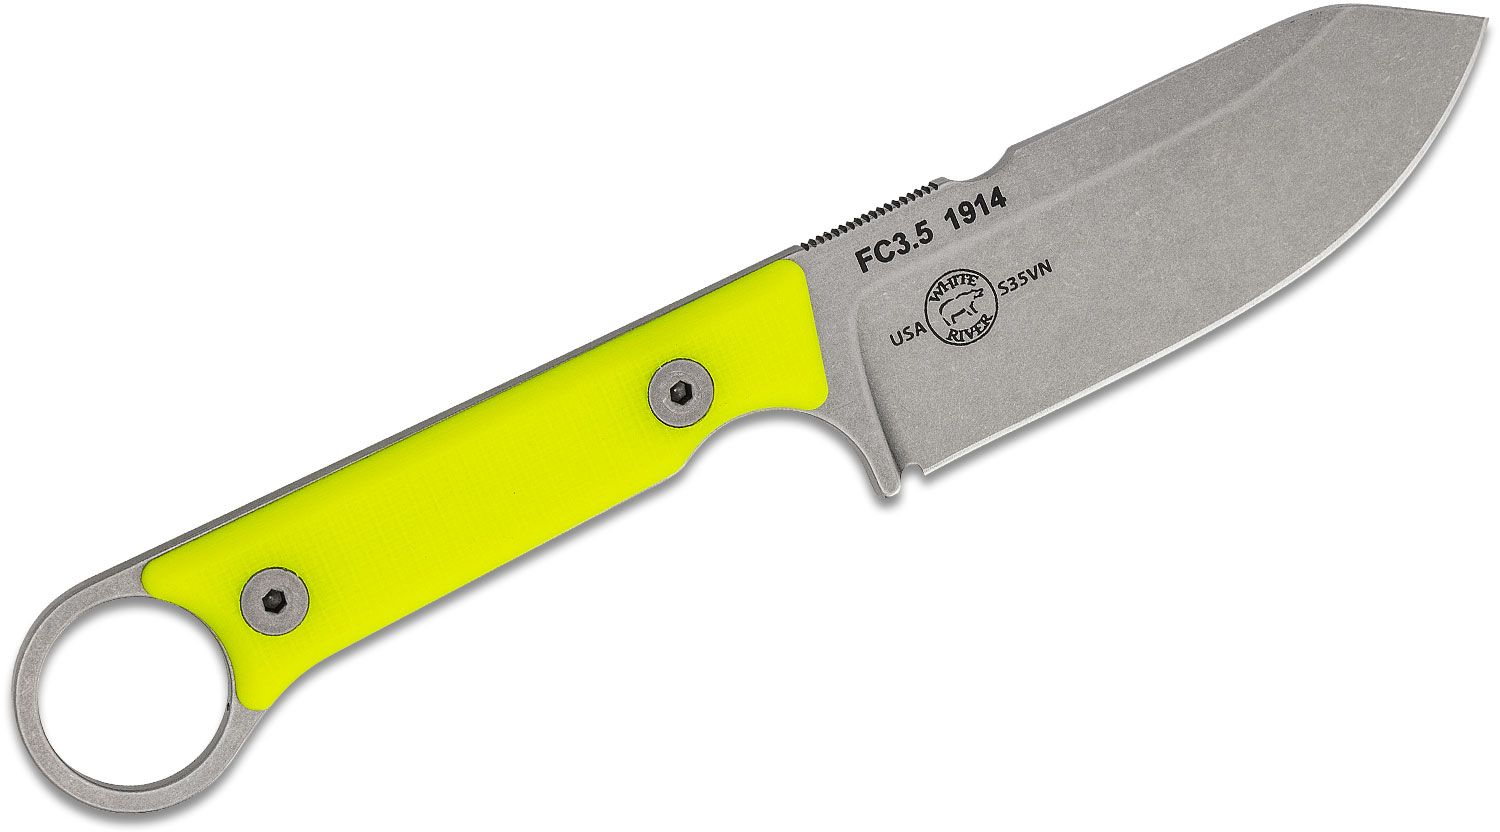 White River Knives Firecraft FC3.5 Pro Fixed Blade Knife 3.5